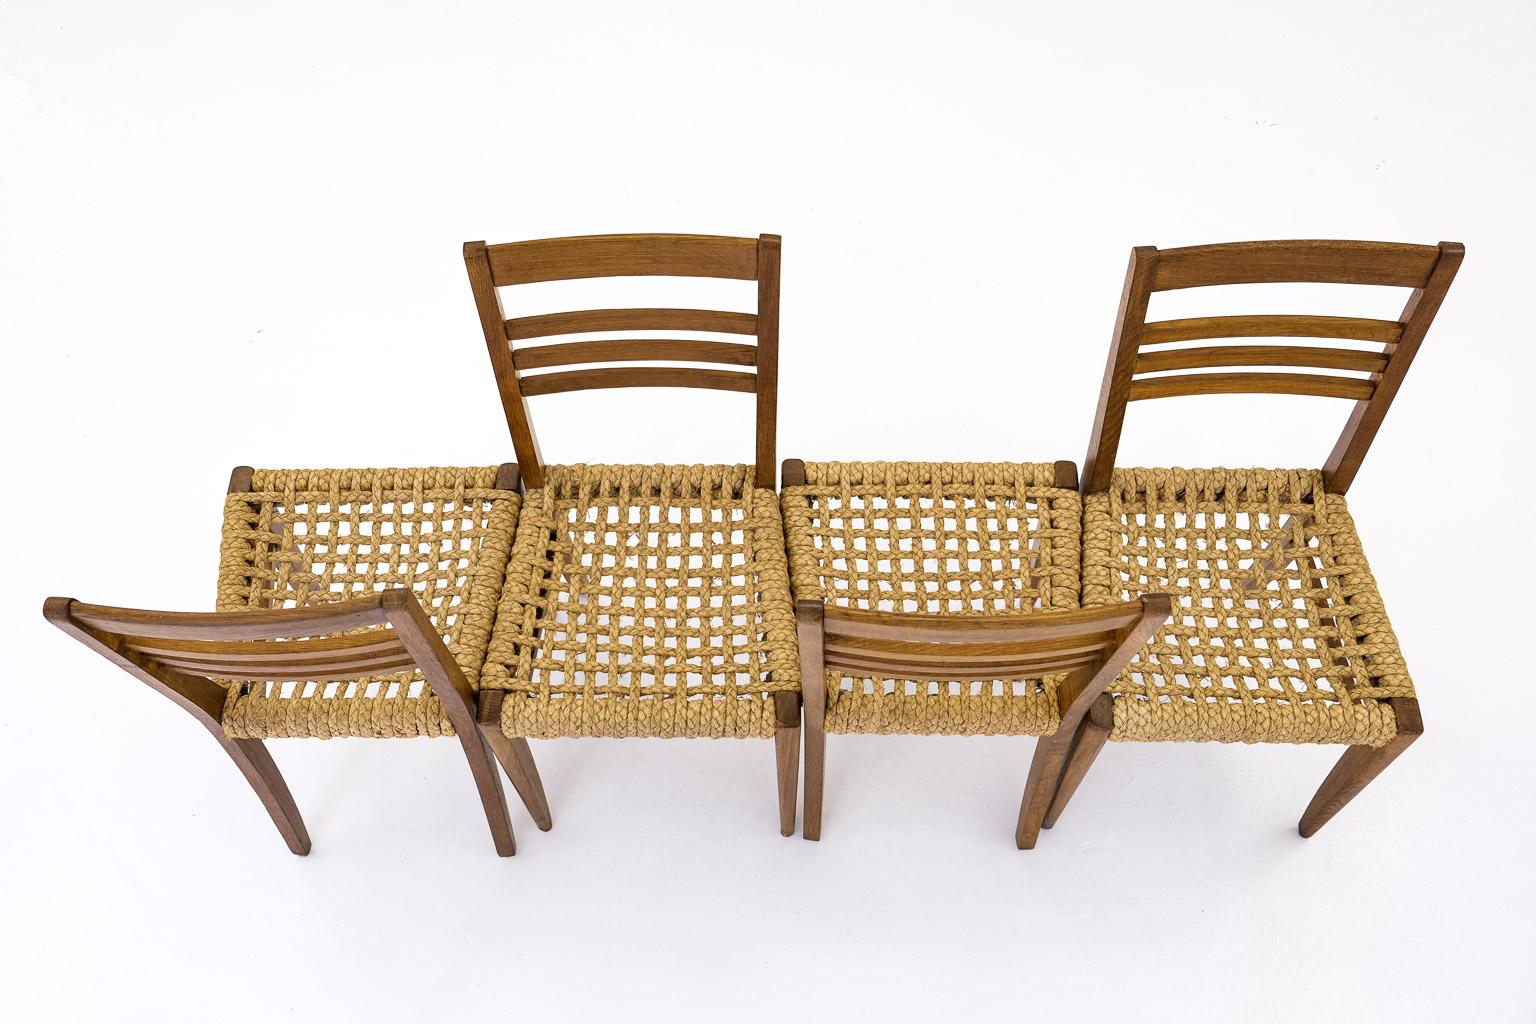 a set of four ‚slung rope‘ dining chairs, designed by audoux-minet for french manufacturer ‚vibo vesoul‘ in marseille, ca. 1950.

here comes the whole story about this french rural chairs: 

think of a holiday in the south of france: what is the